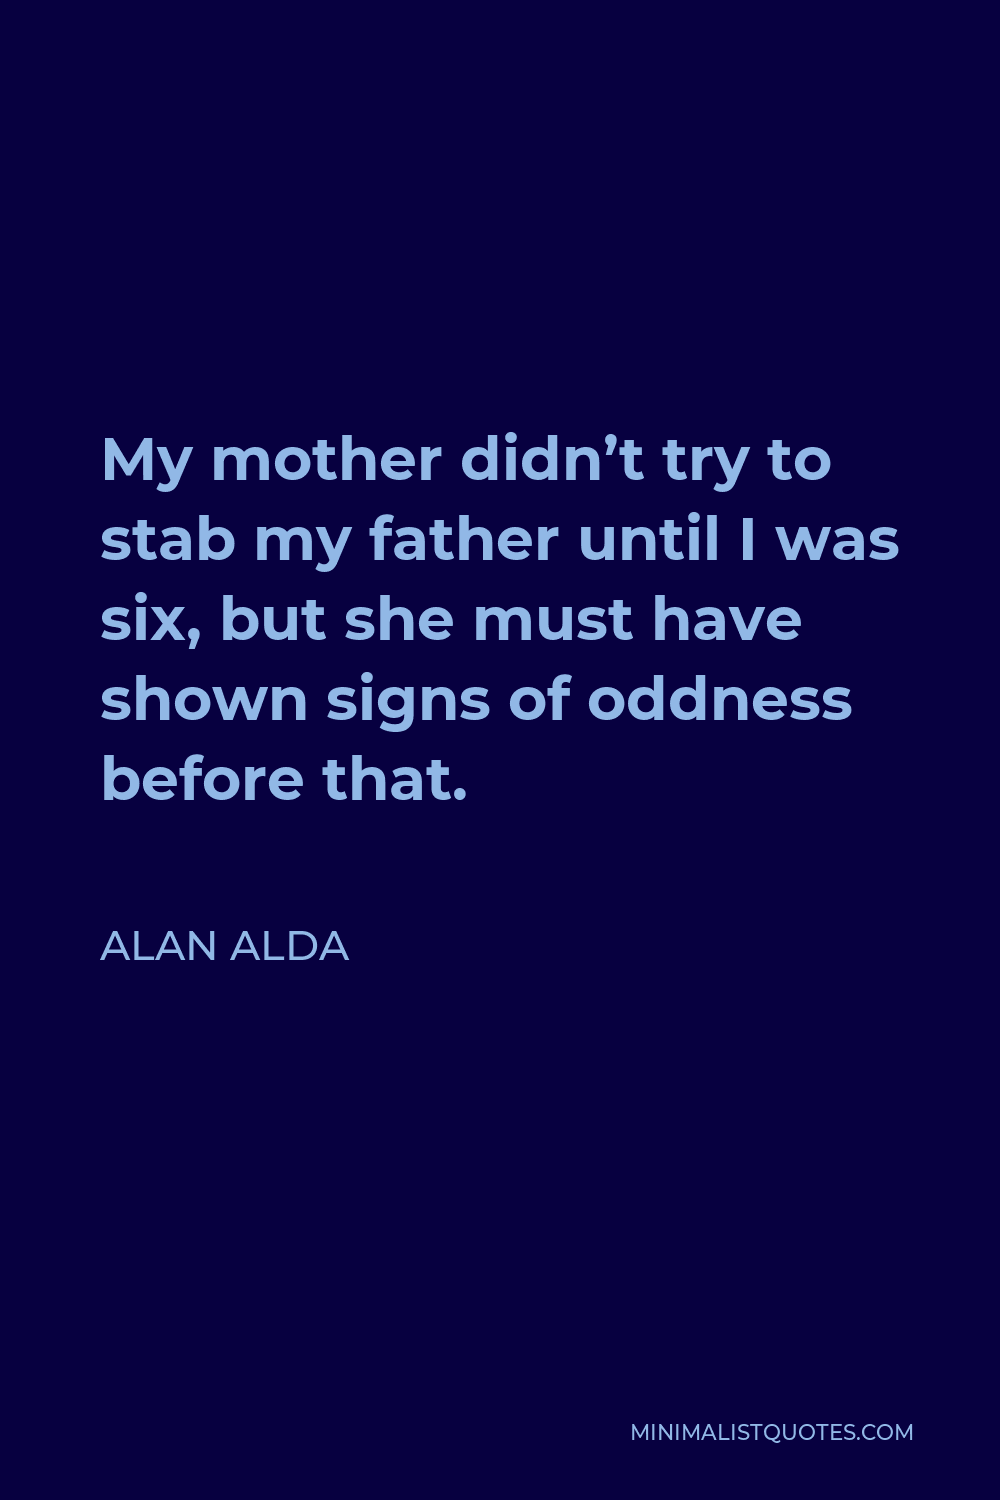 Alan Alda Quote - My mother didn’t try to stab my father until I was six, but she must have shown signs of oddness before that.